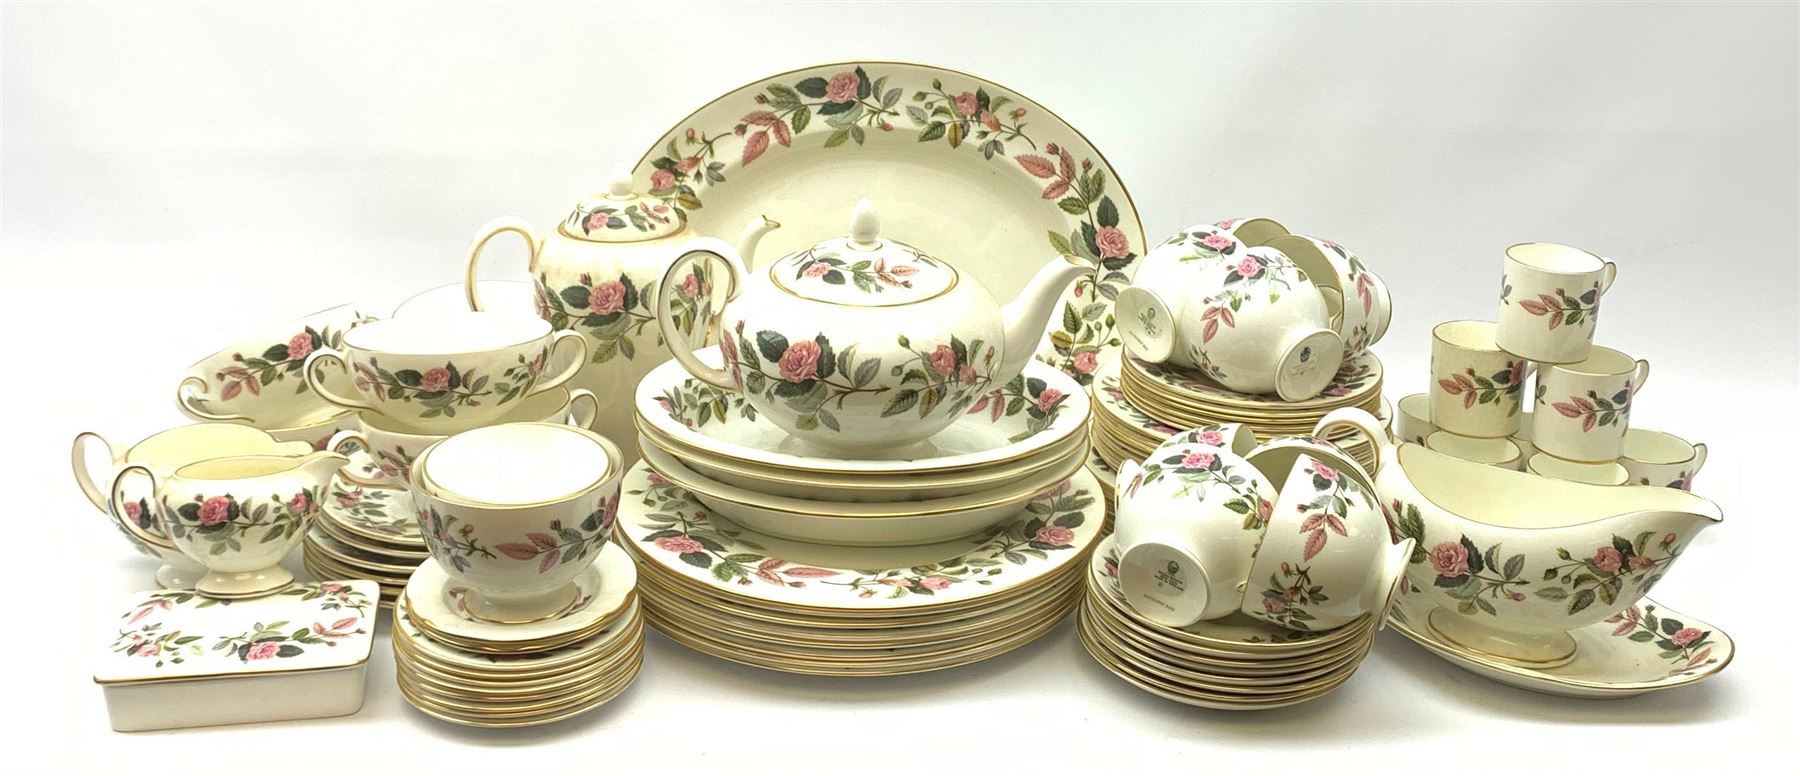 Wedgwood Hathaway Rose pattern dinner and tea wares